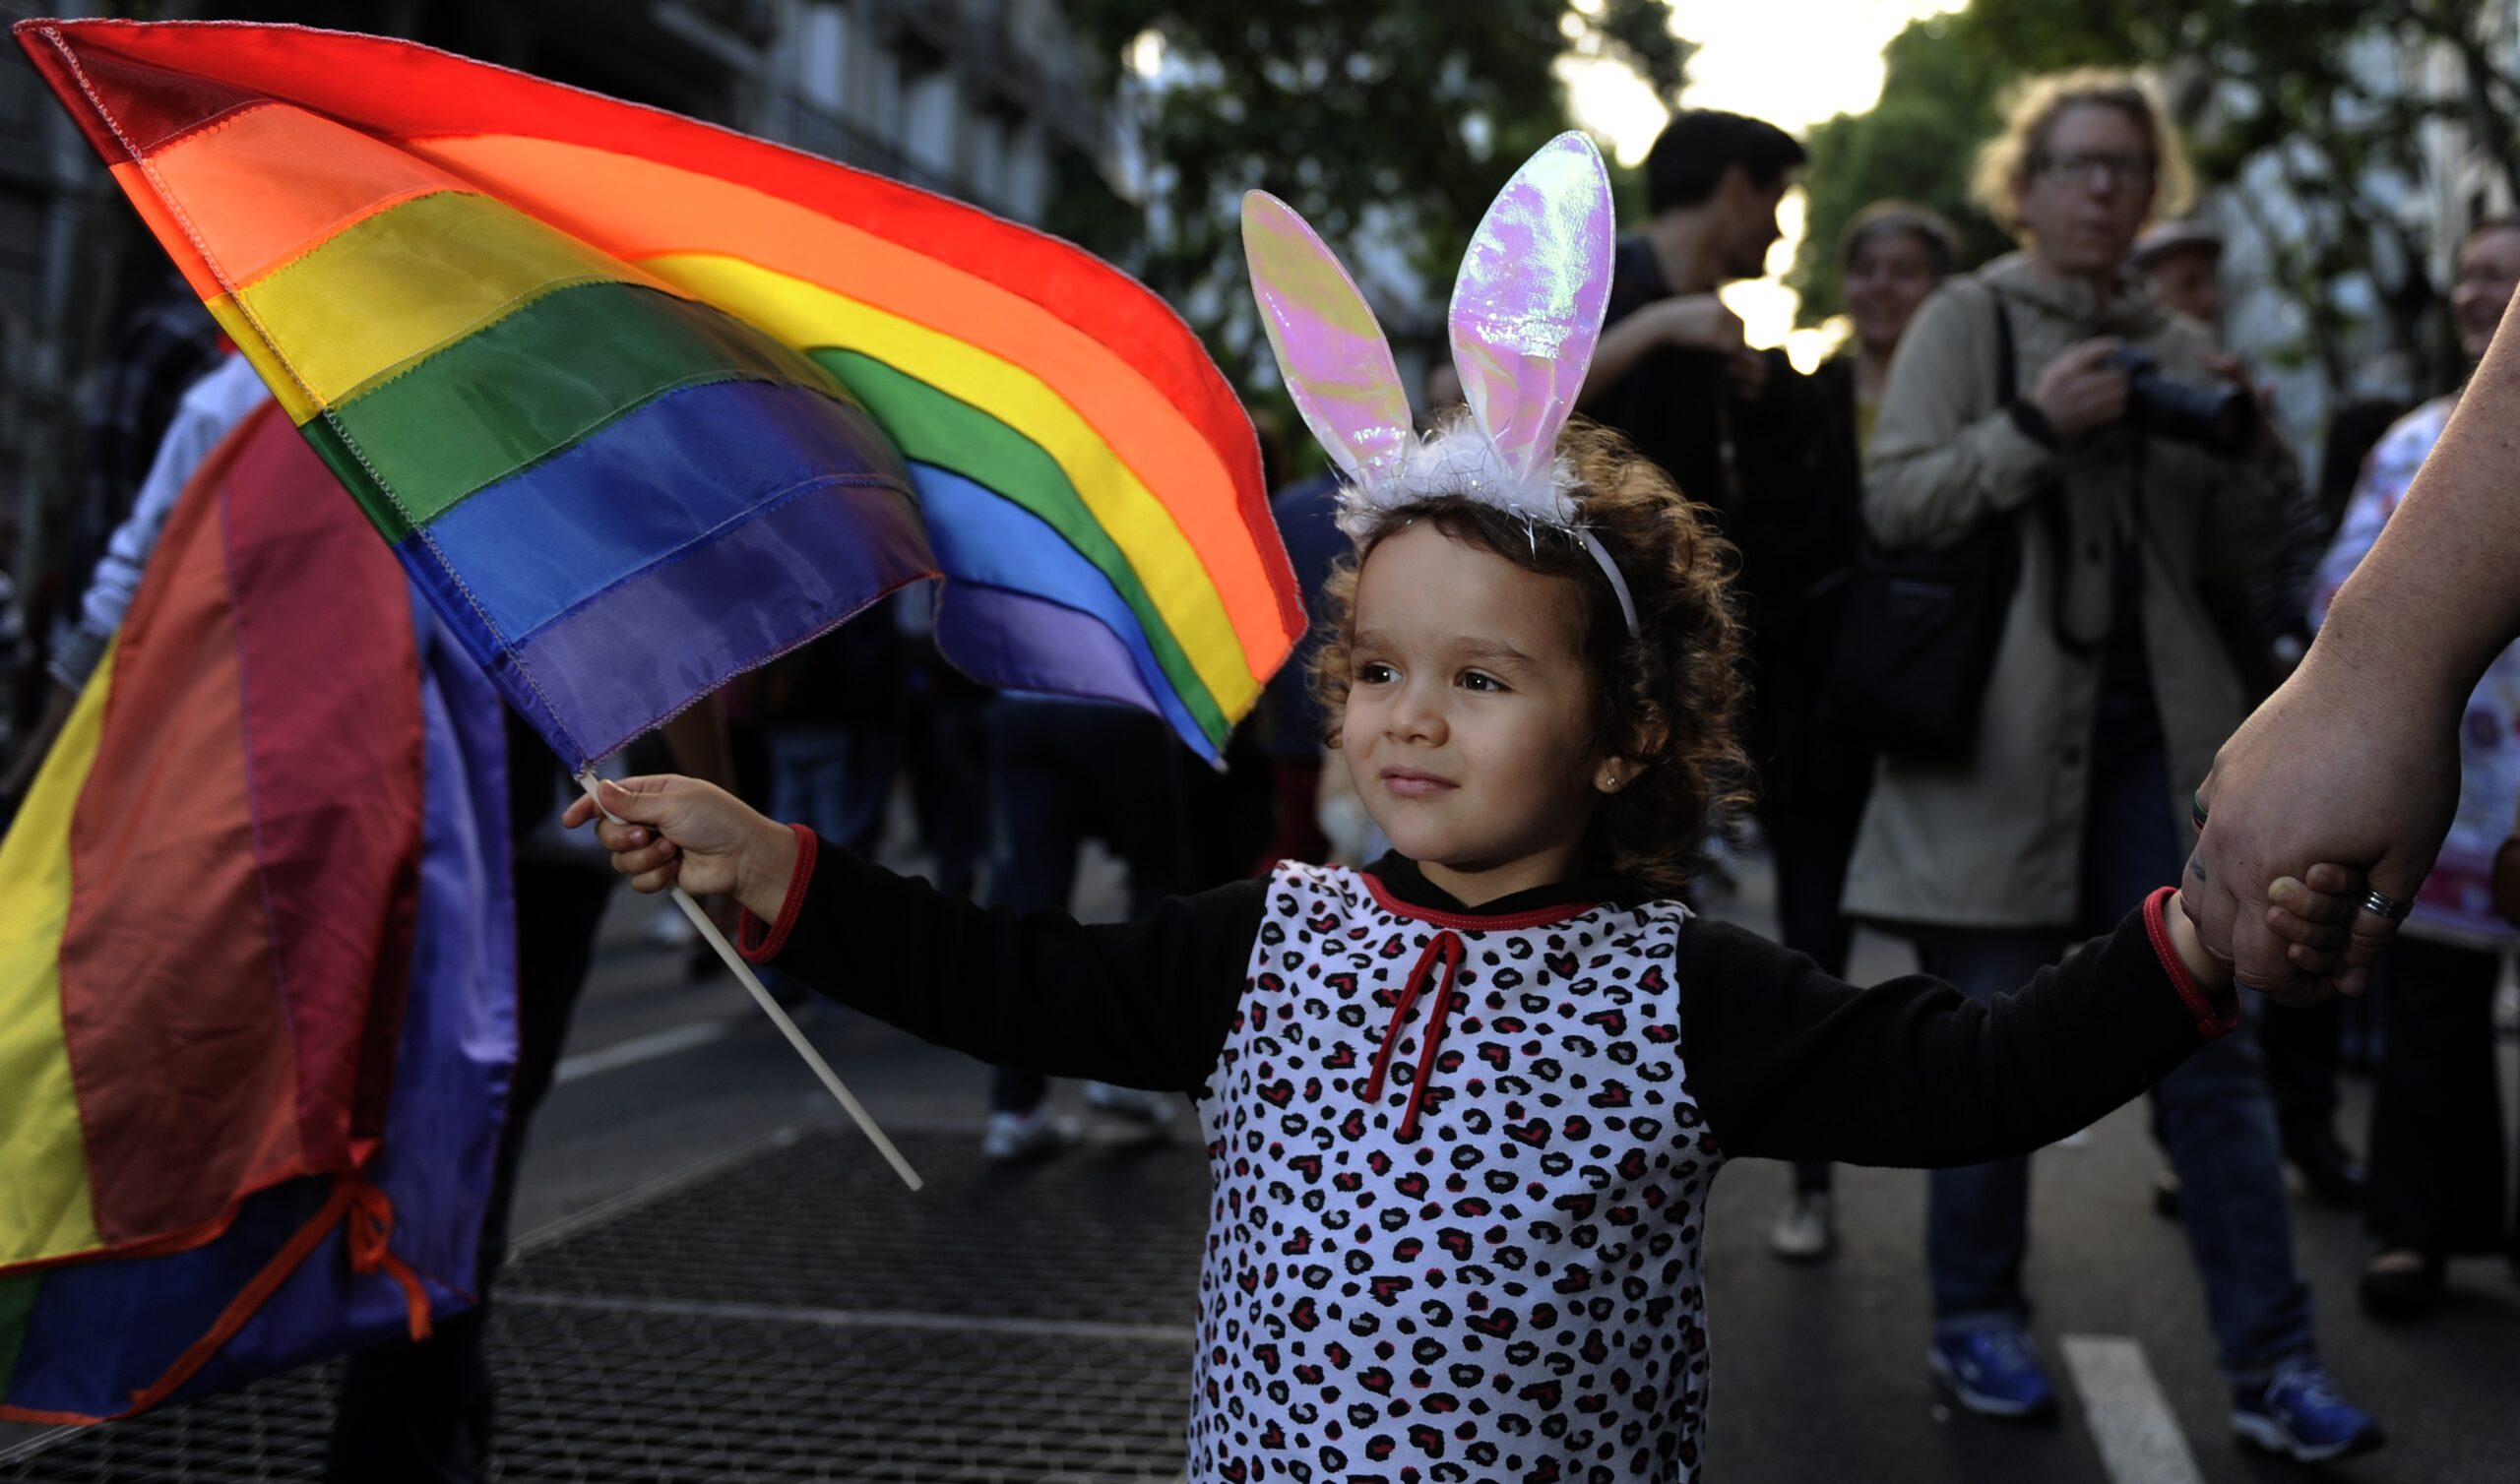 The LGBT movement is trying to recruit children. Statistics show it is working